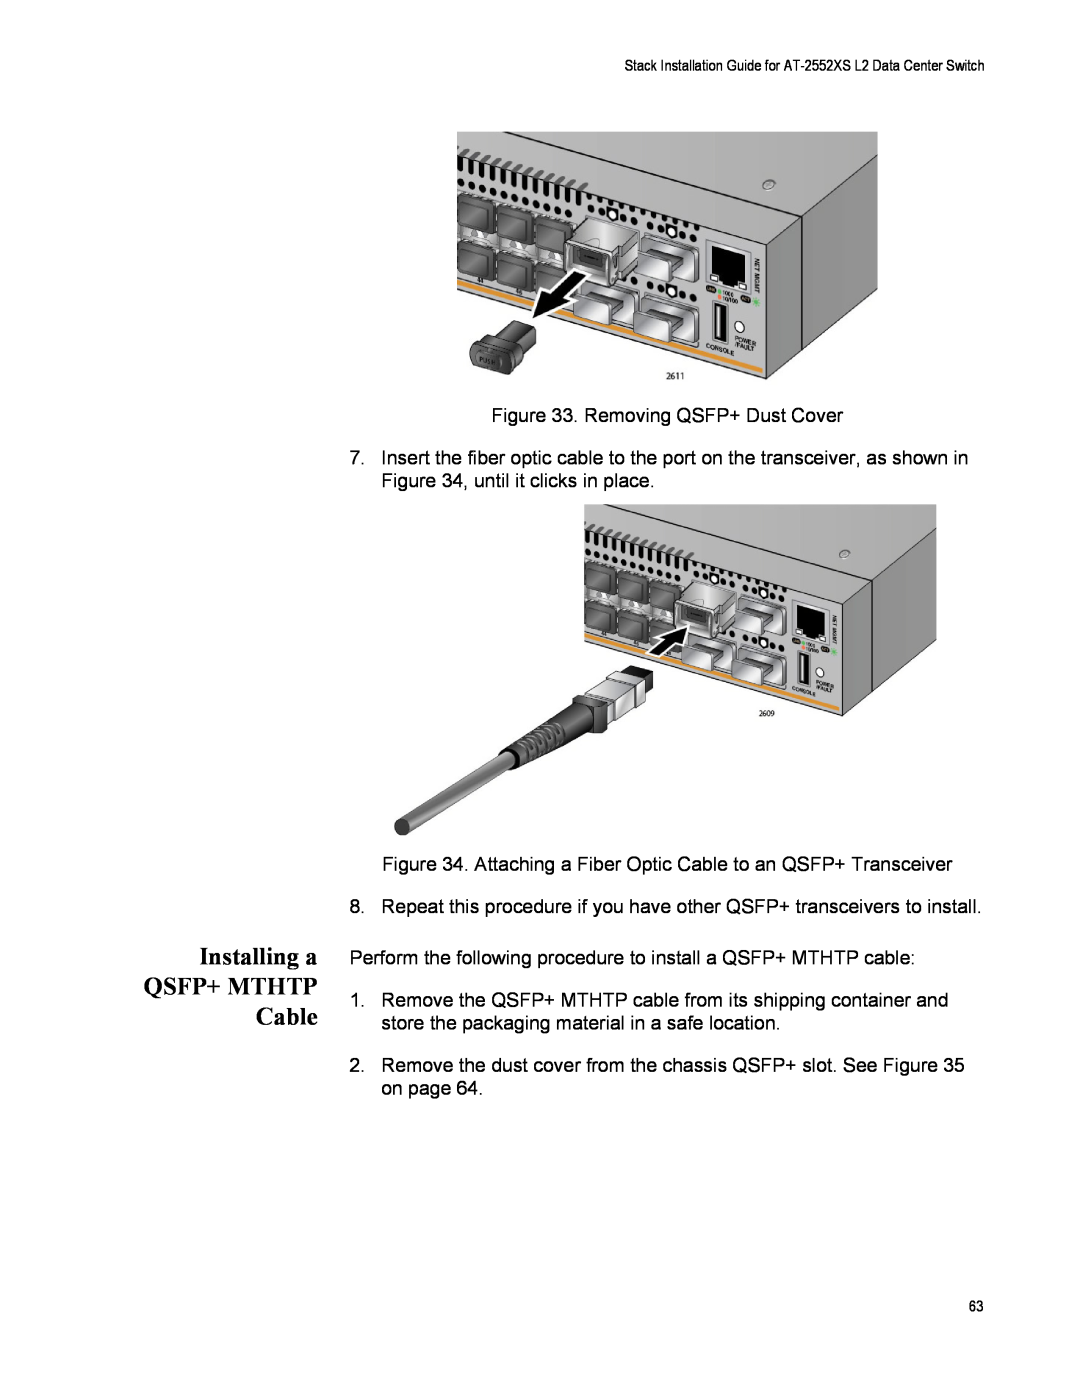 Allied Telesis AT-PWR06, AT-DC2552XS, AT-FAN06 manual Installing a QSFP+ MTHTP Cable 